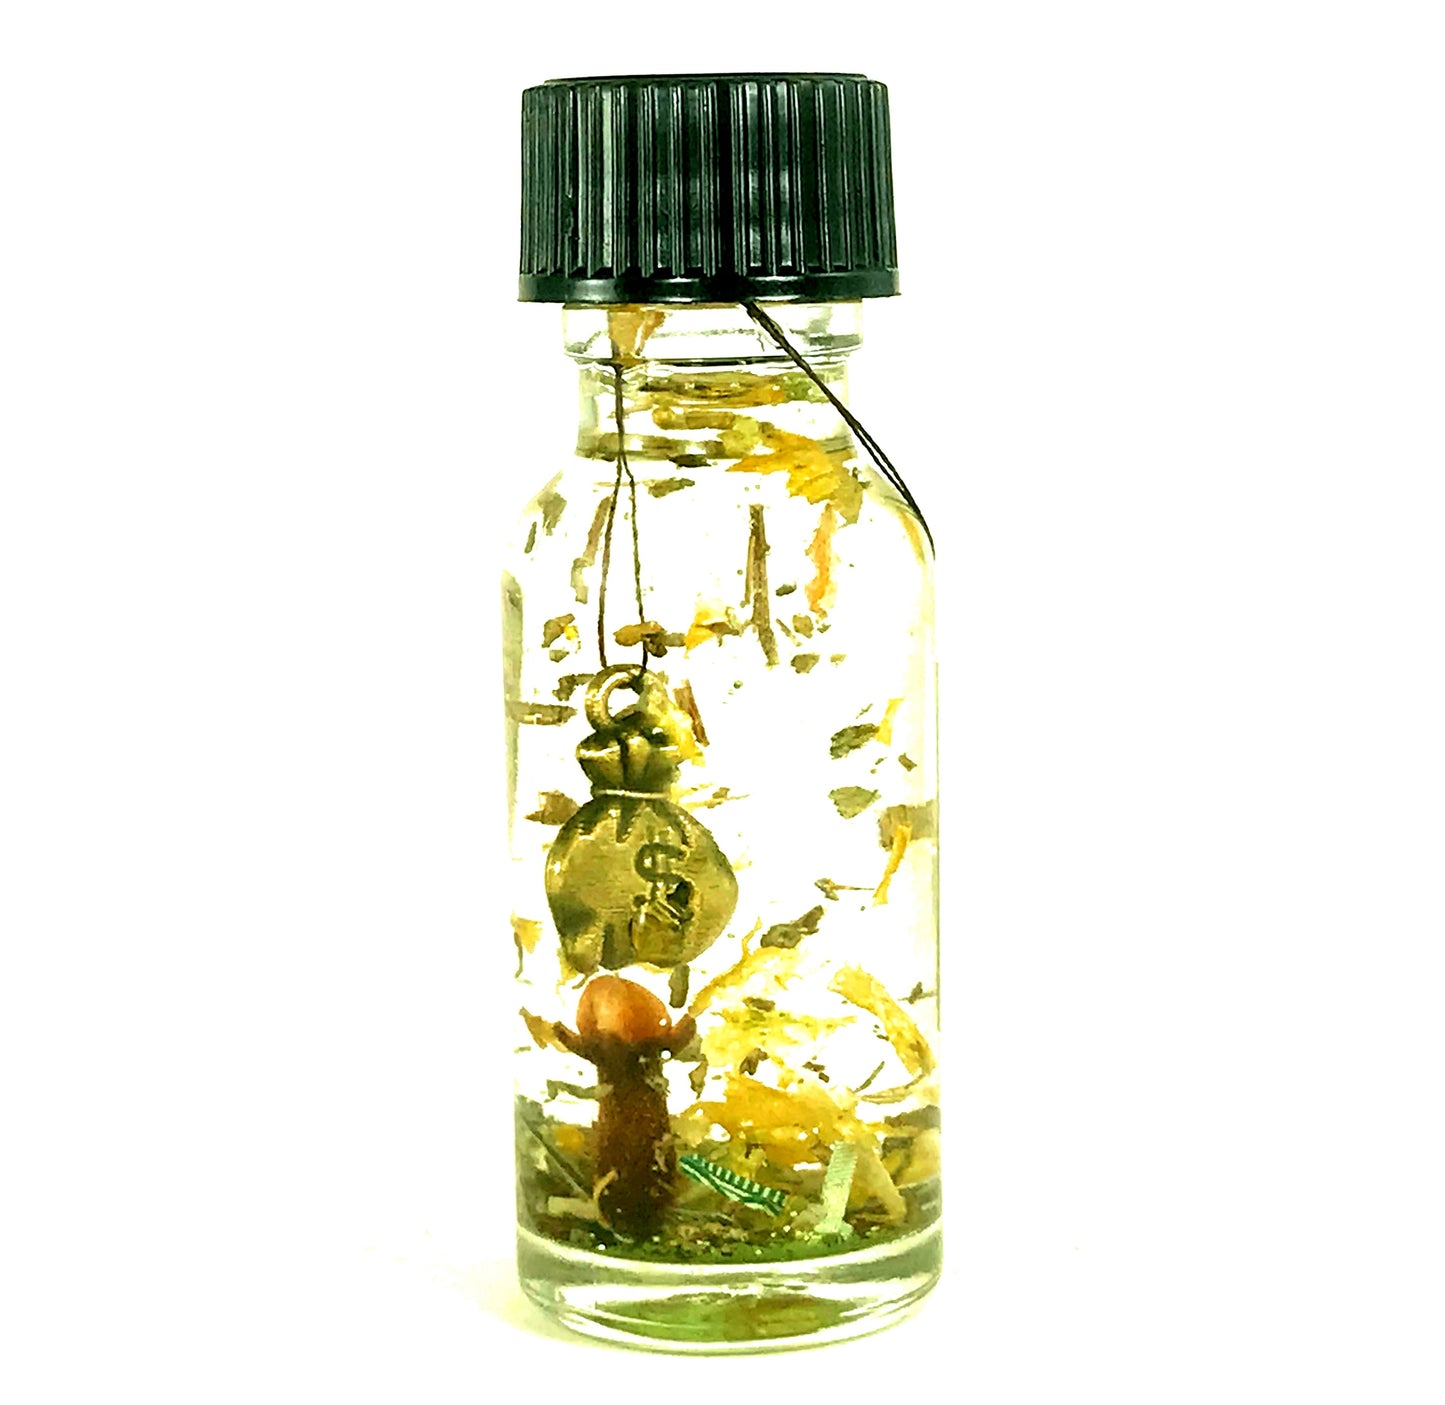 Twichery Employment Oil: An attraction oil formulated specifically to draw that perfect job into your life! Hoodoo Voodoo Wicca Pagan